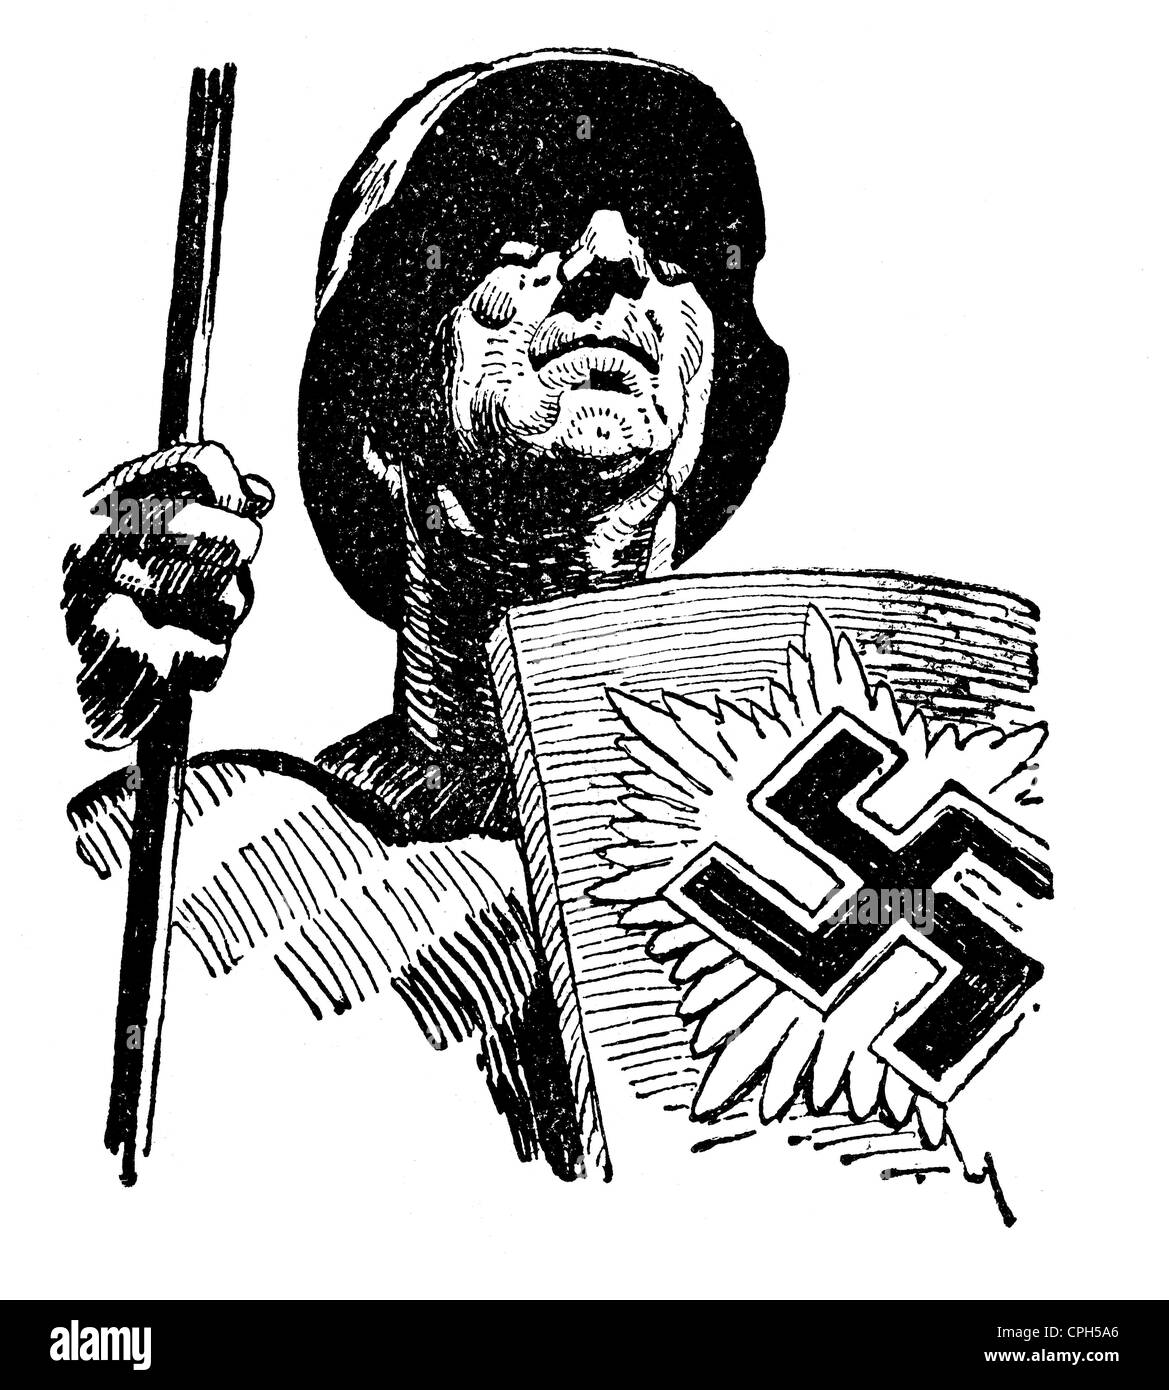 National Socialism / Nazism, 1933 - 1945, Additional-Rights-Clearences-Not Available Stock Photo